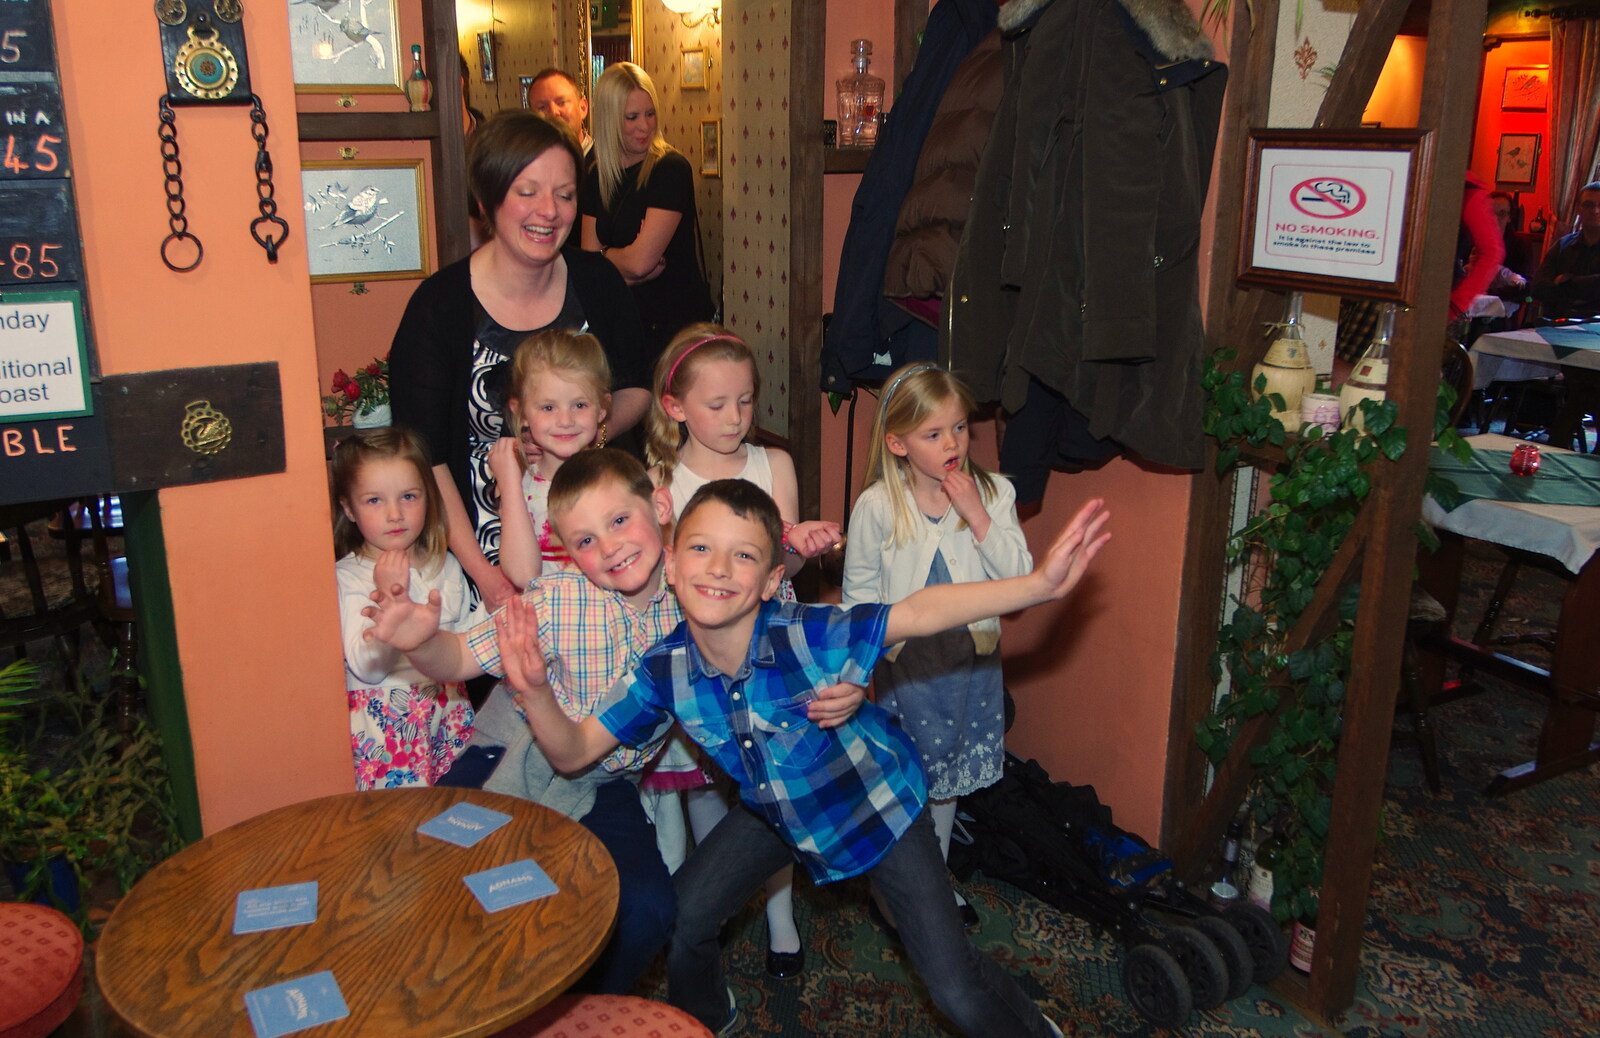 A group of children eagerly wait from Spammy's Birthday, The Swan Inn, Brome, Suffolk - 27th April 2013